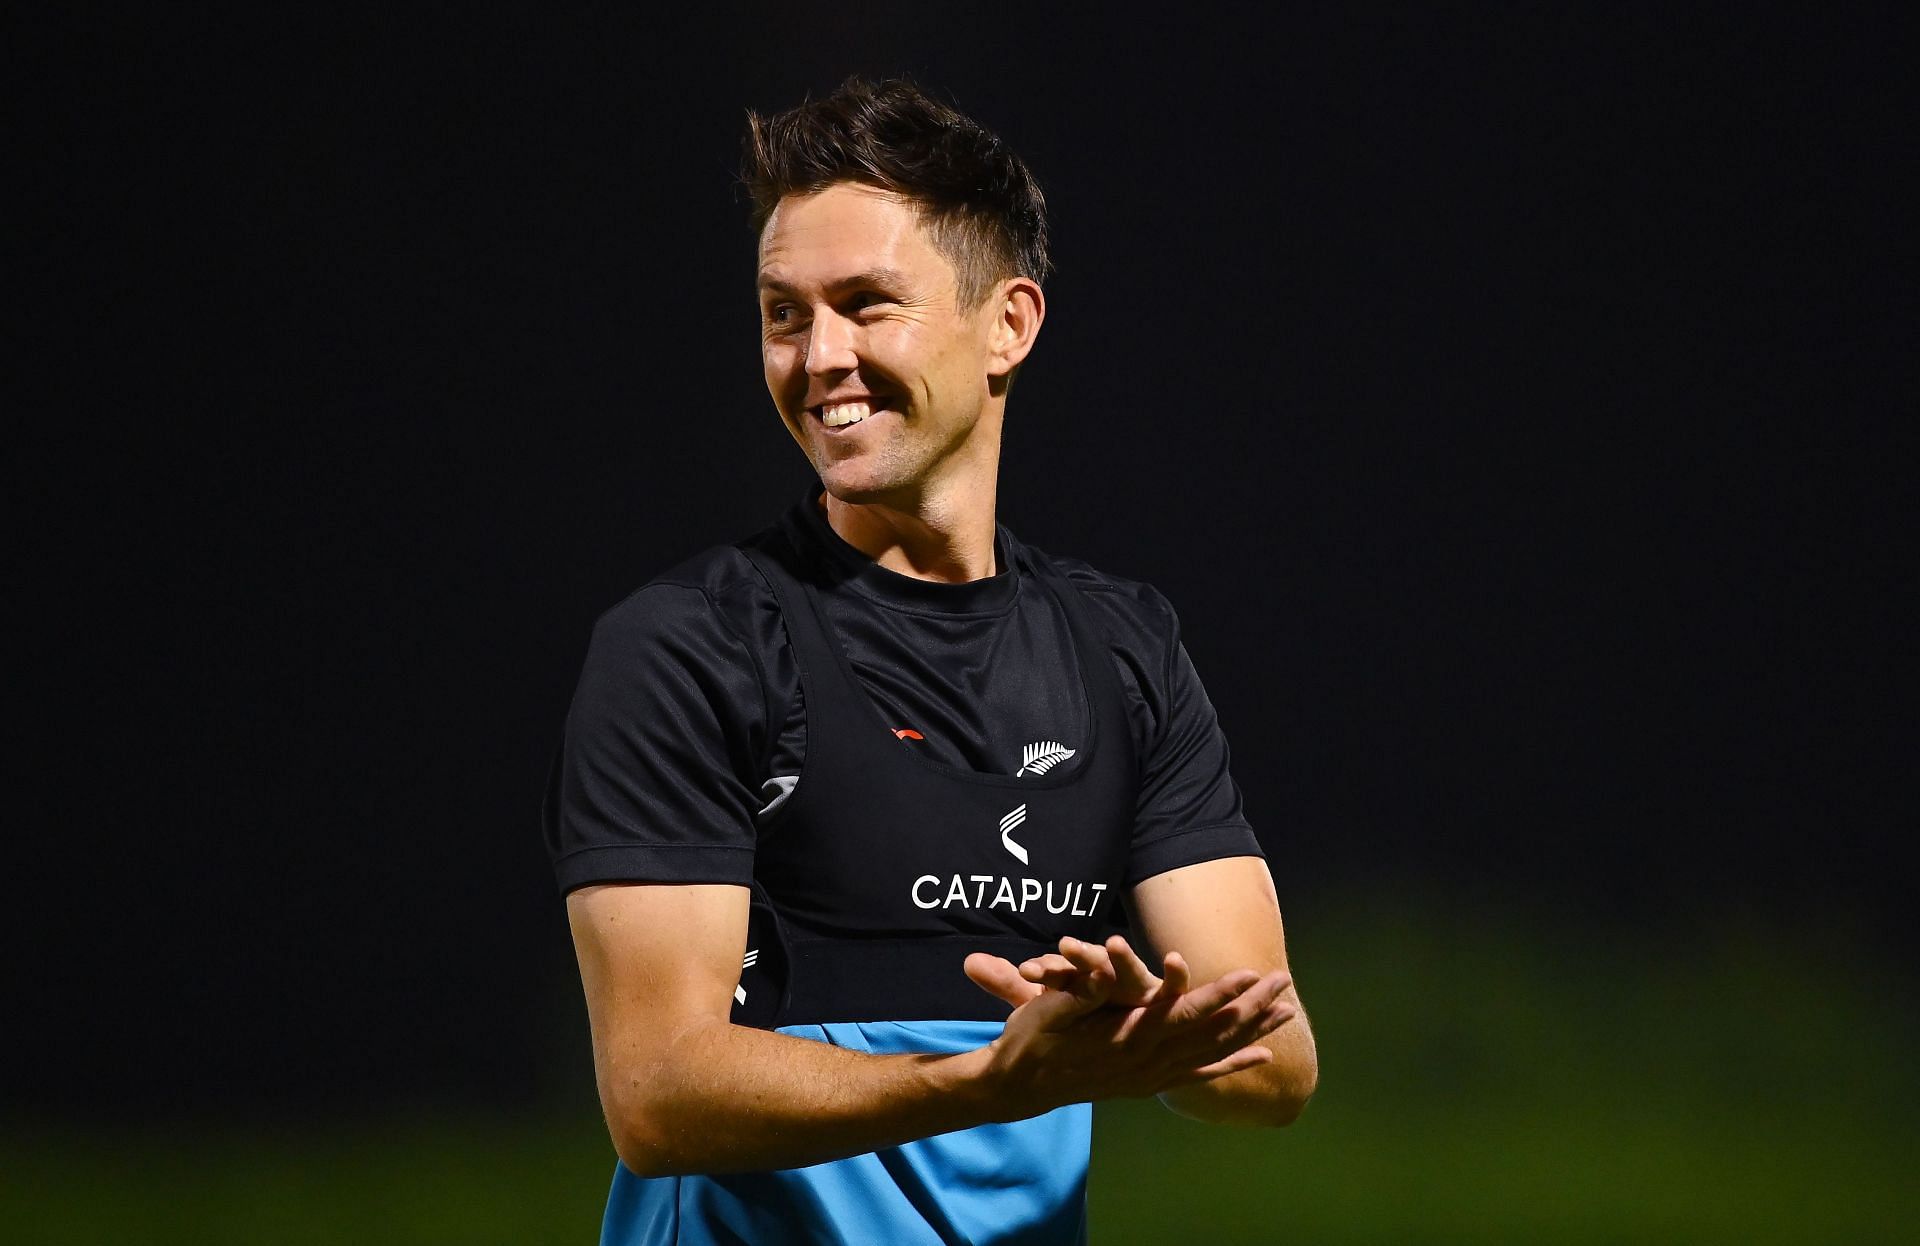 Trent Boult has joined the MI Emirates for the upcoming T20 league in the UAE